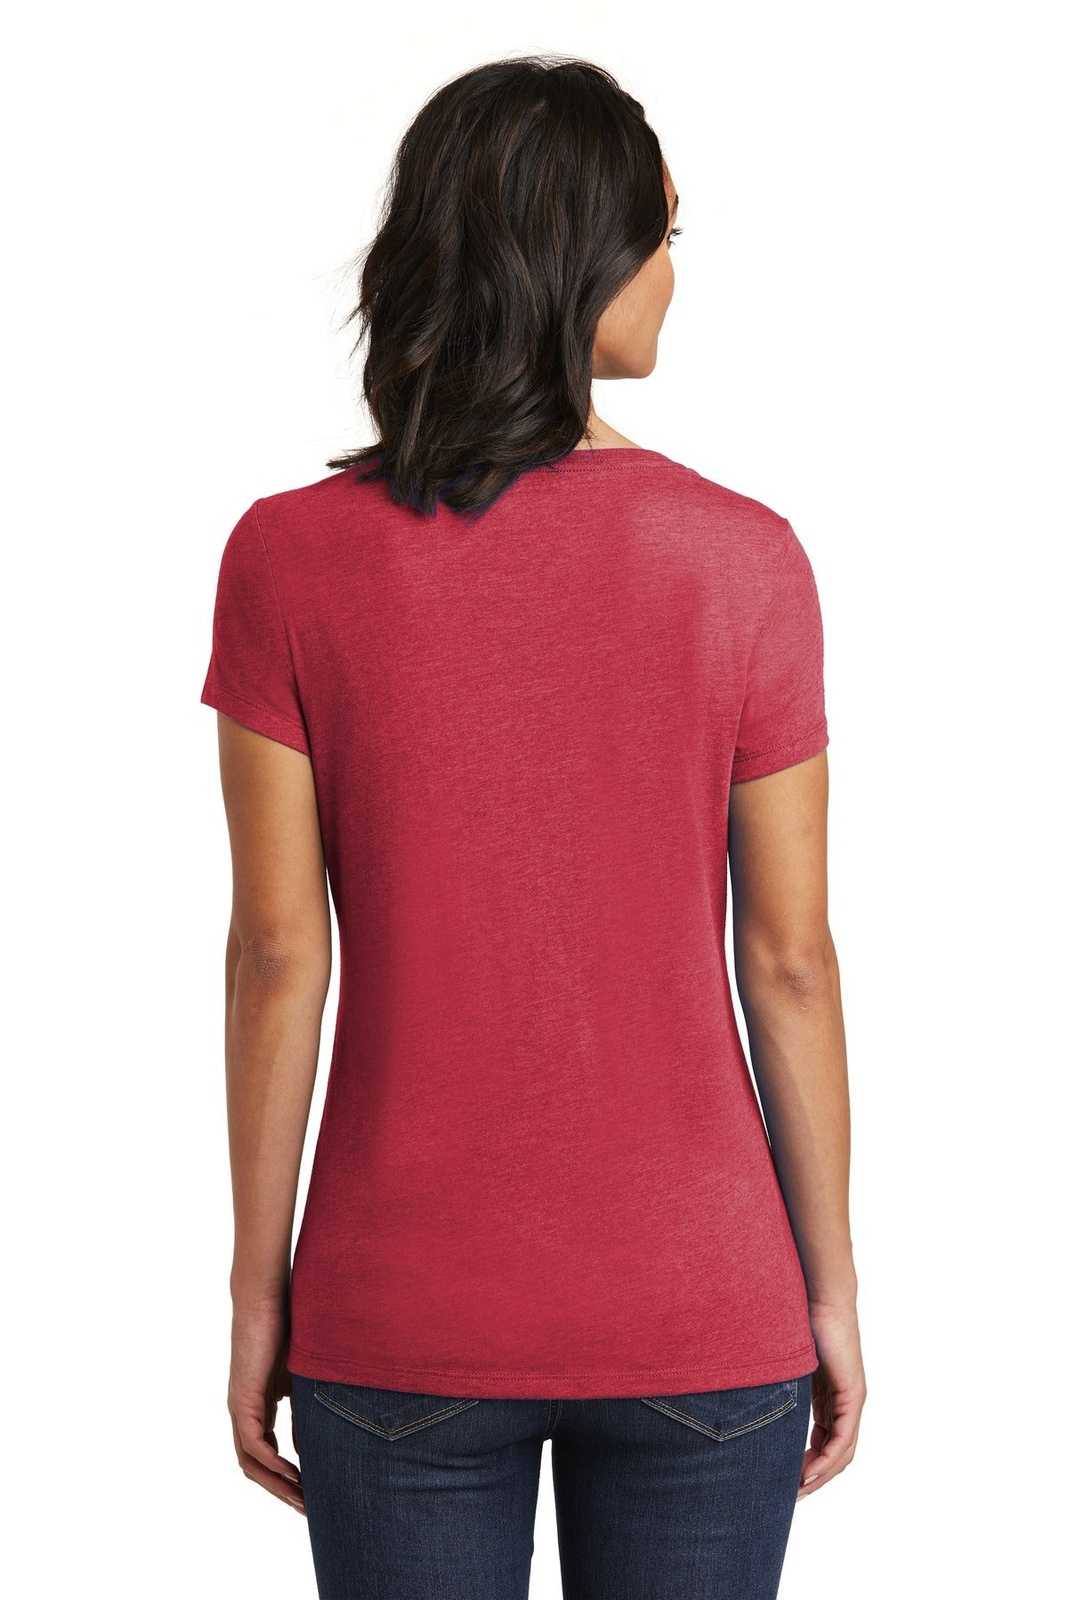 District DT6503 Women's Very Important Tee V-Neck - Heathered Red - HIT a Double - 1